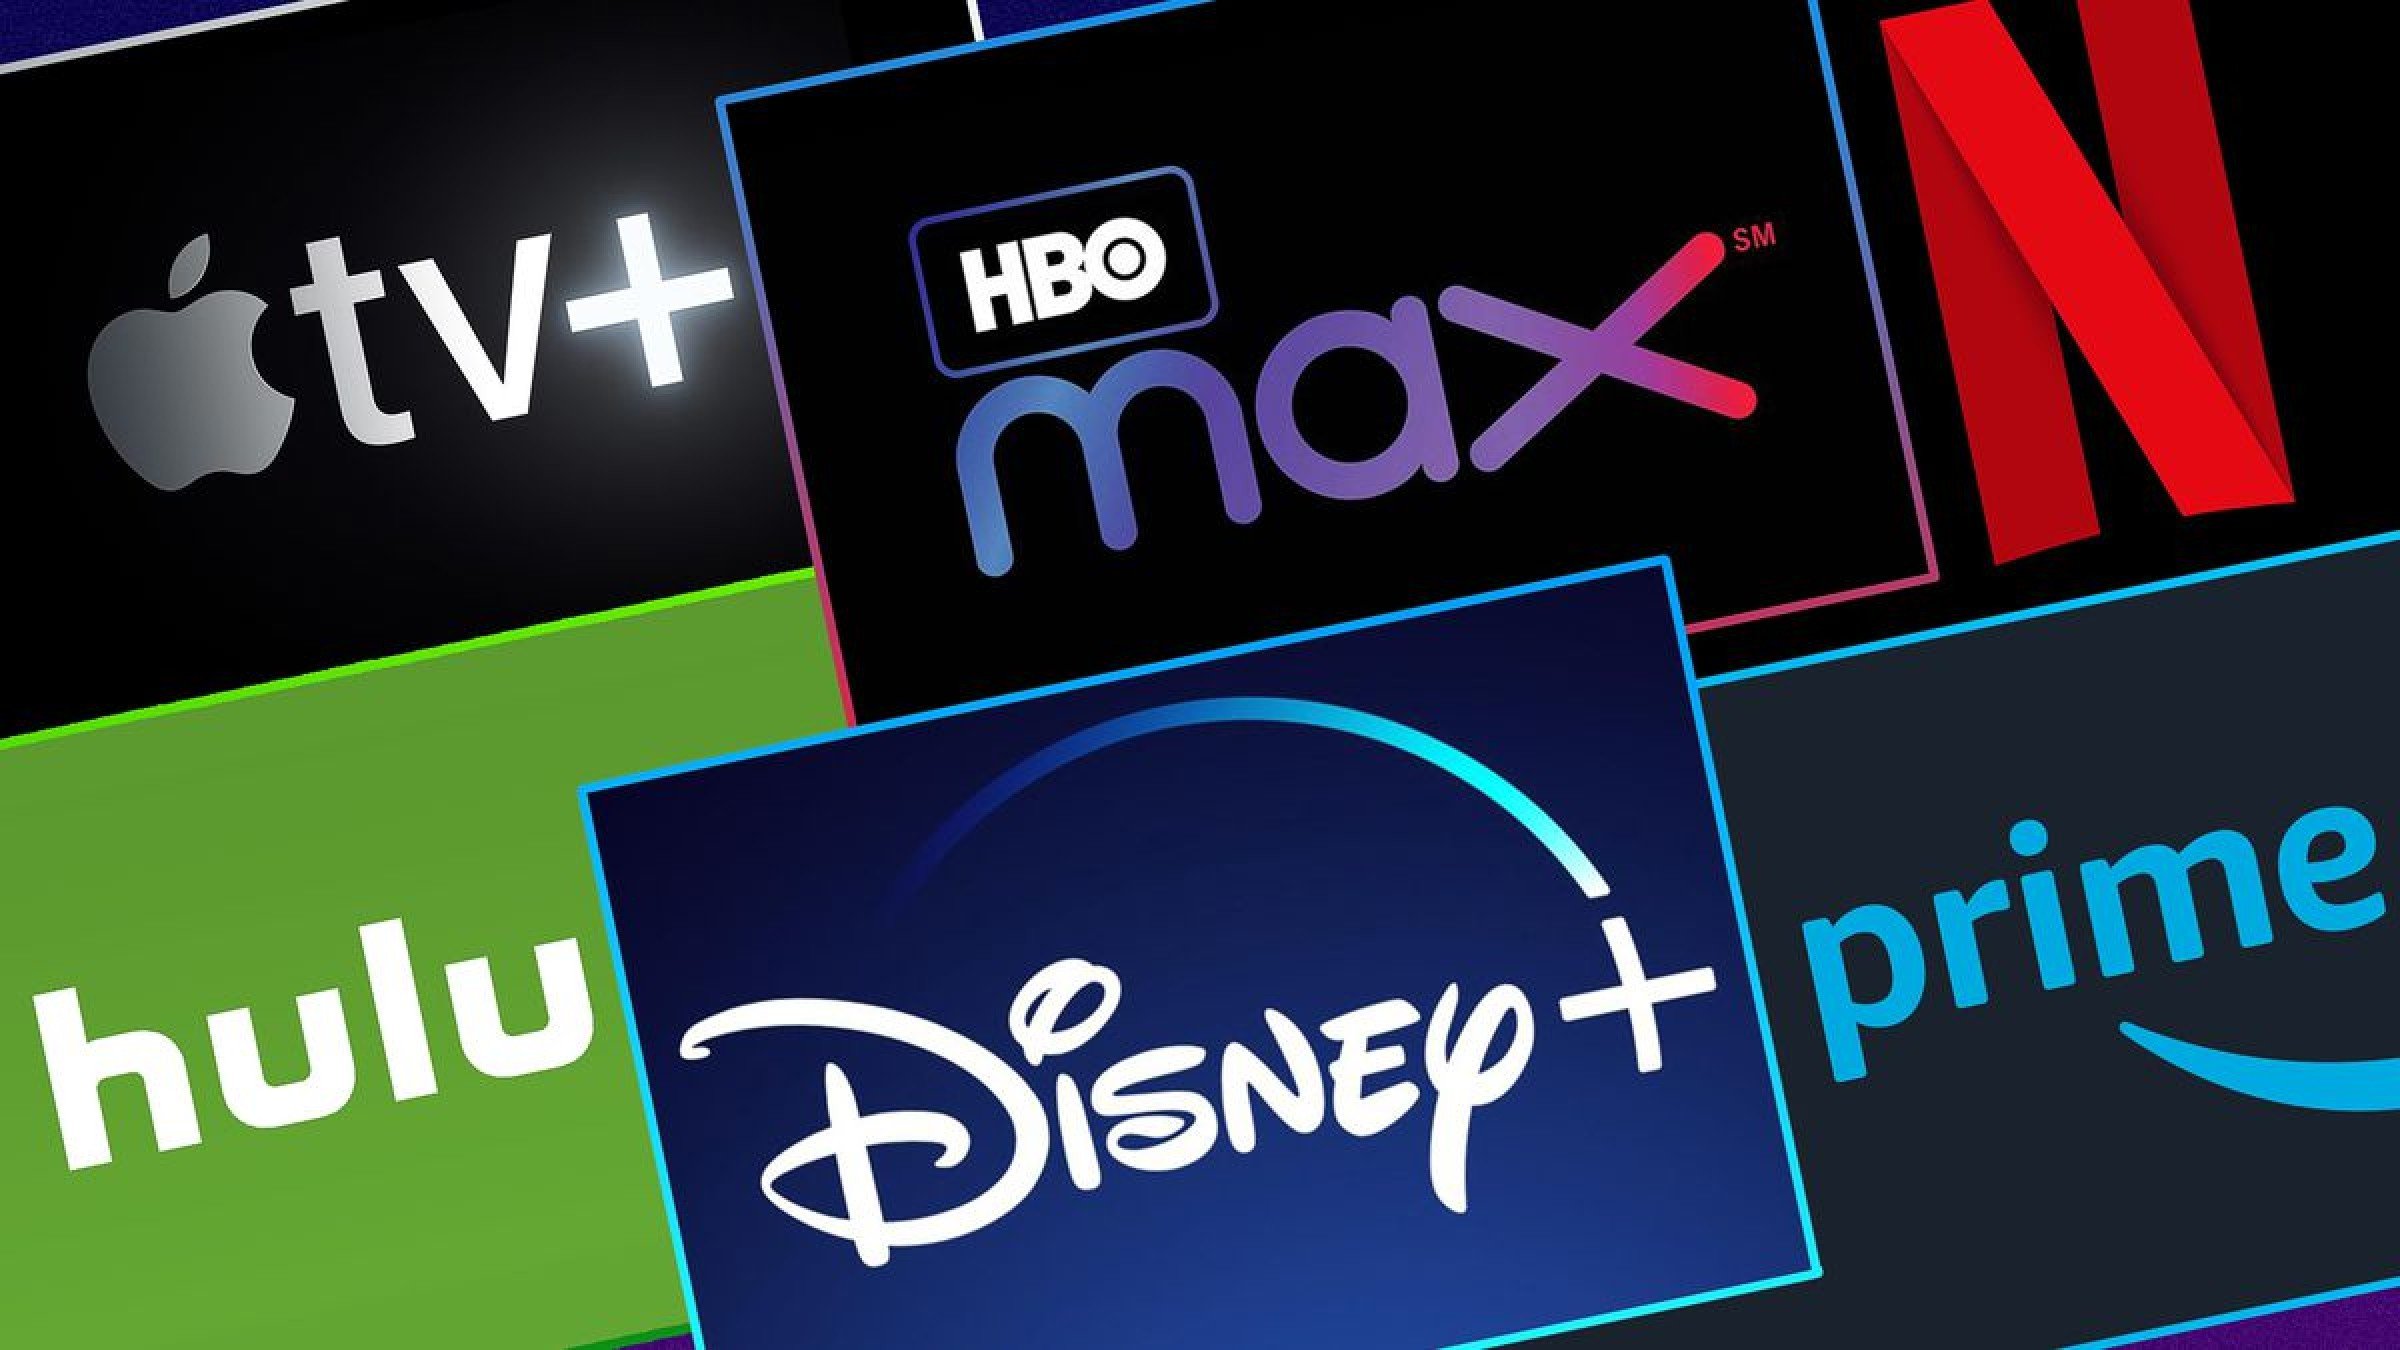 What Streaming Service Has the Most Subscribers Globally?